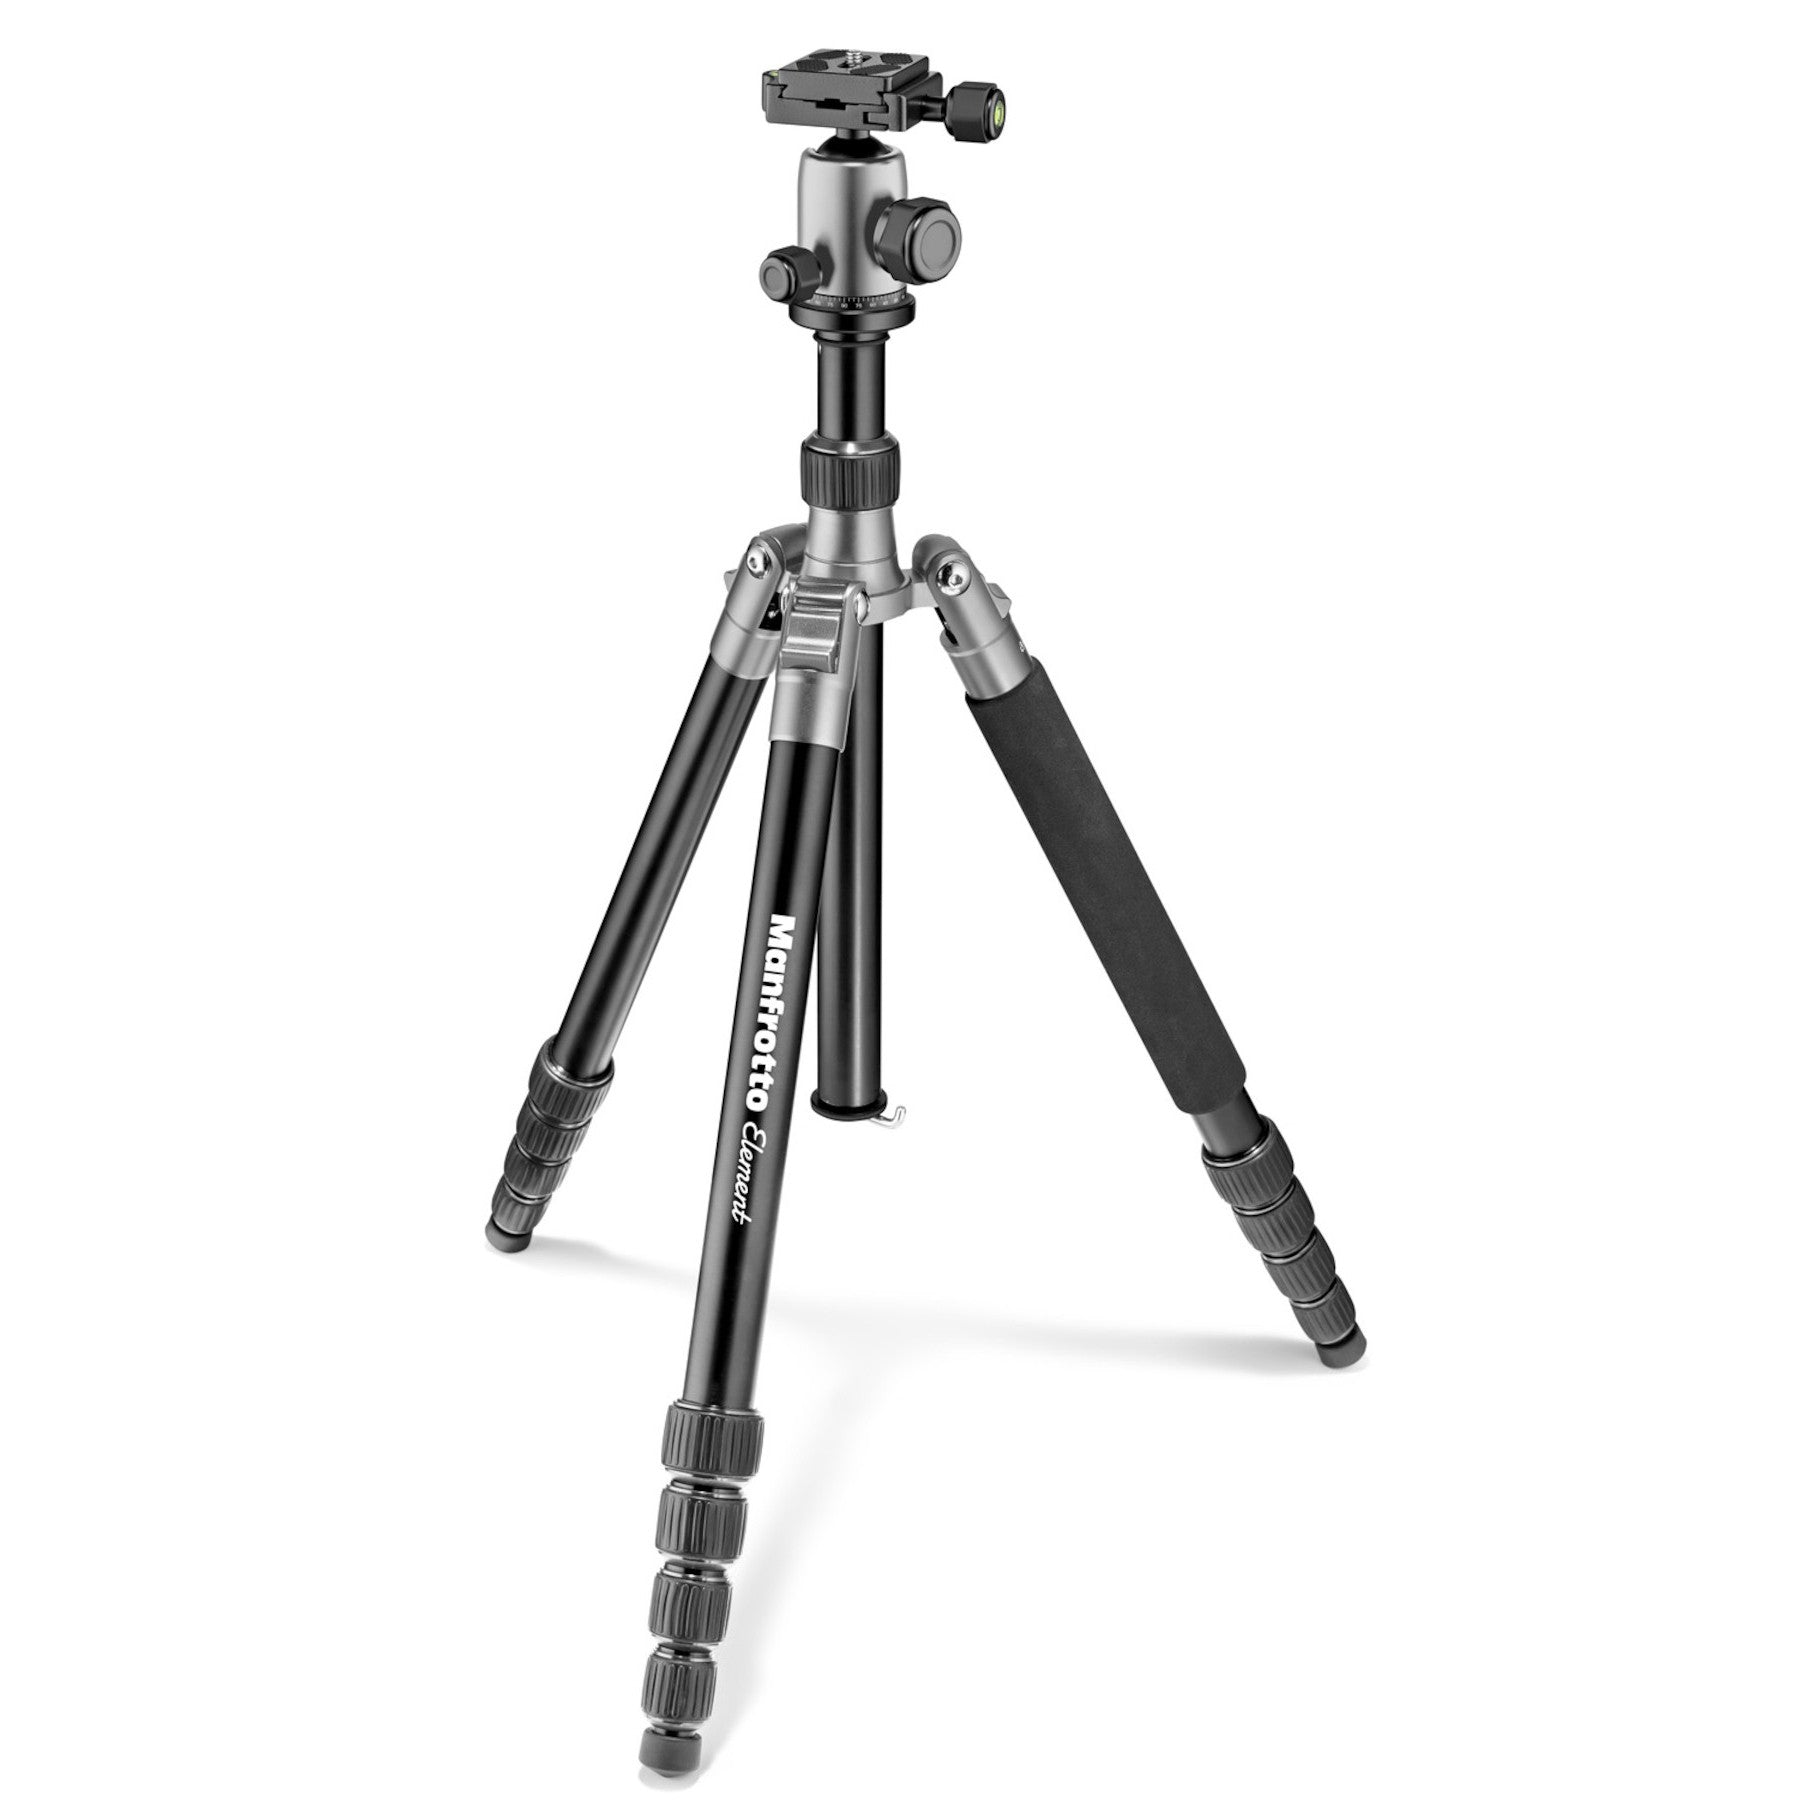 Manfrotto MKELEB5GY-BH Element Big Aluminum Traveler Tripod (Gray), tripods travel & compact, Manfrotto - Pictureline  - 1